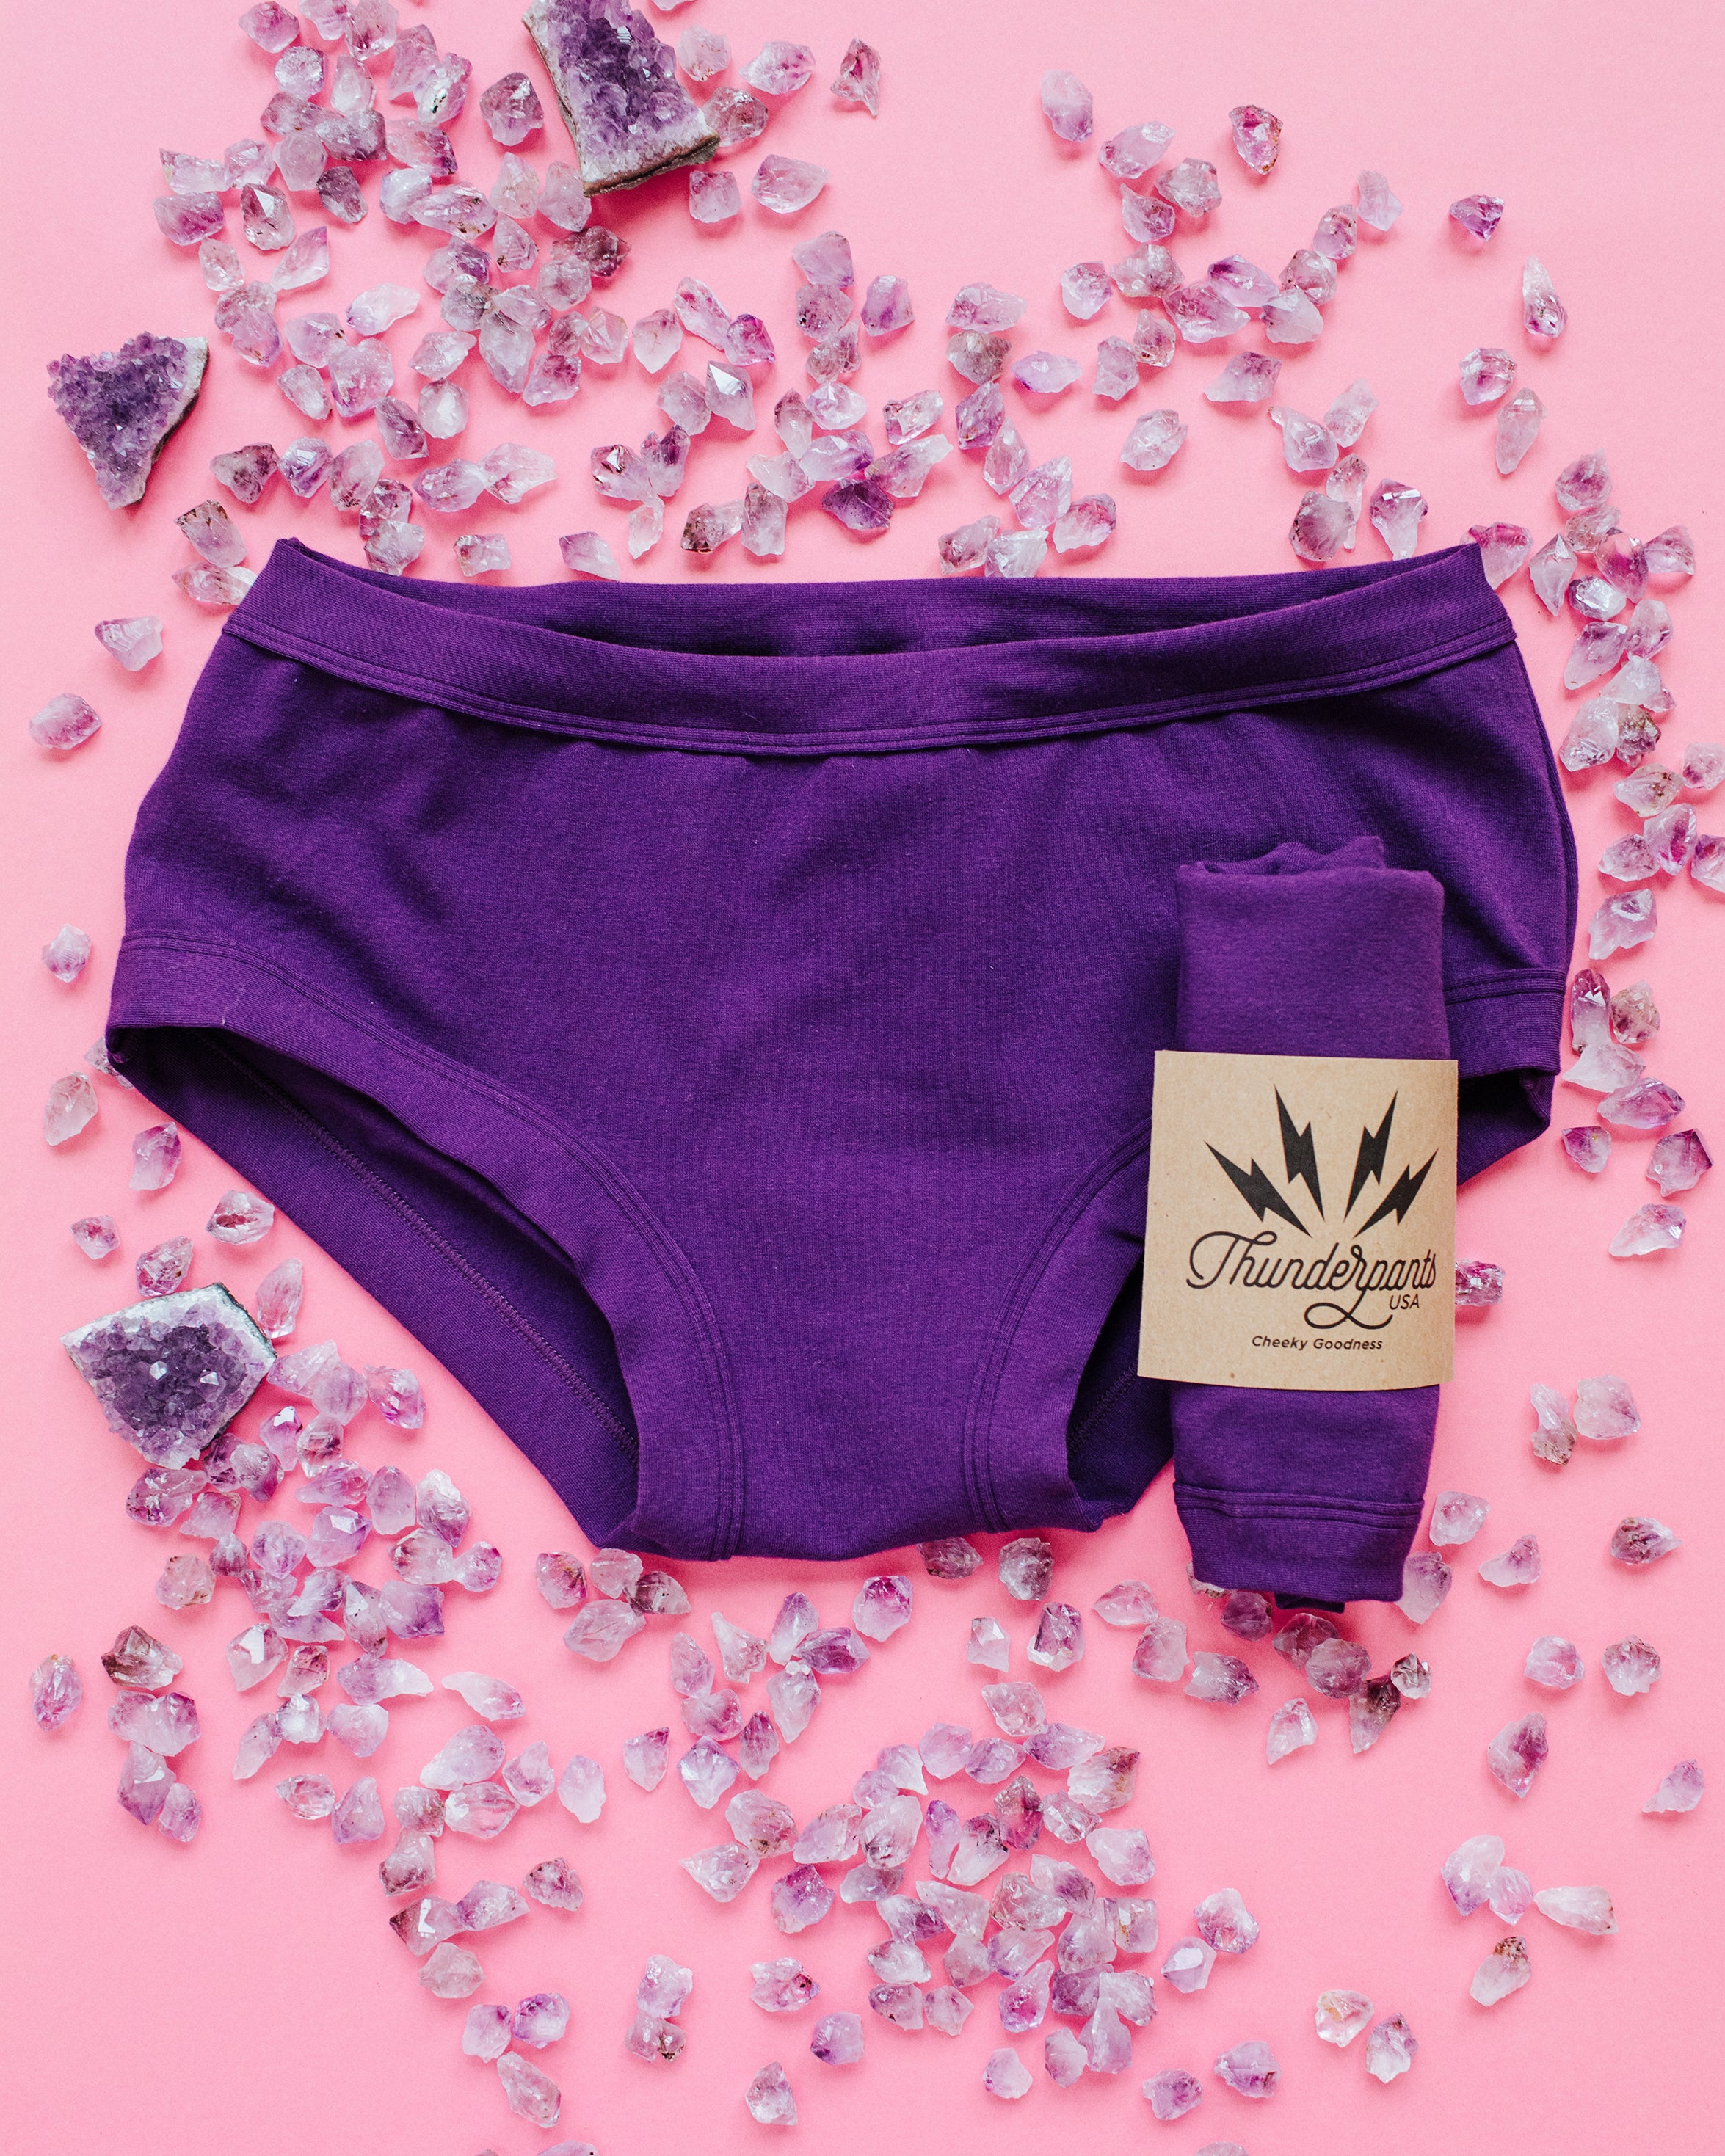 Flat lay of purple Deep Amethyst Hipster style underwear and packaged underwear on a pink surface with lots of small and large amethyst stones surrounding.